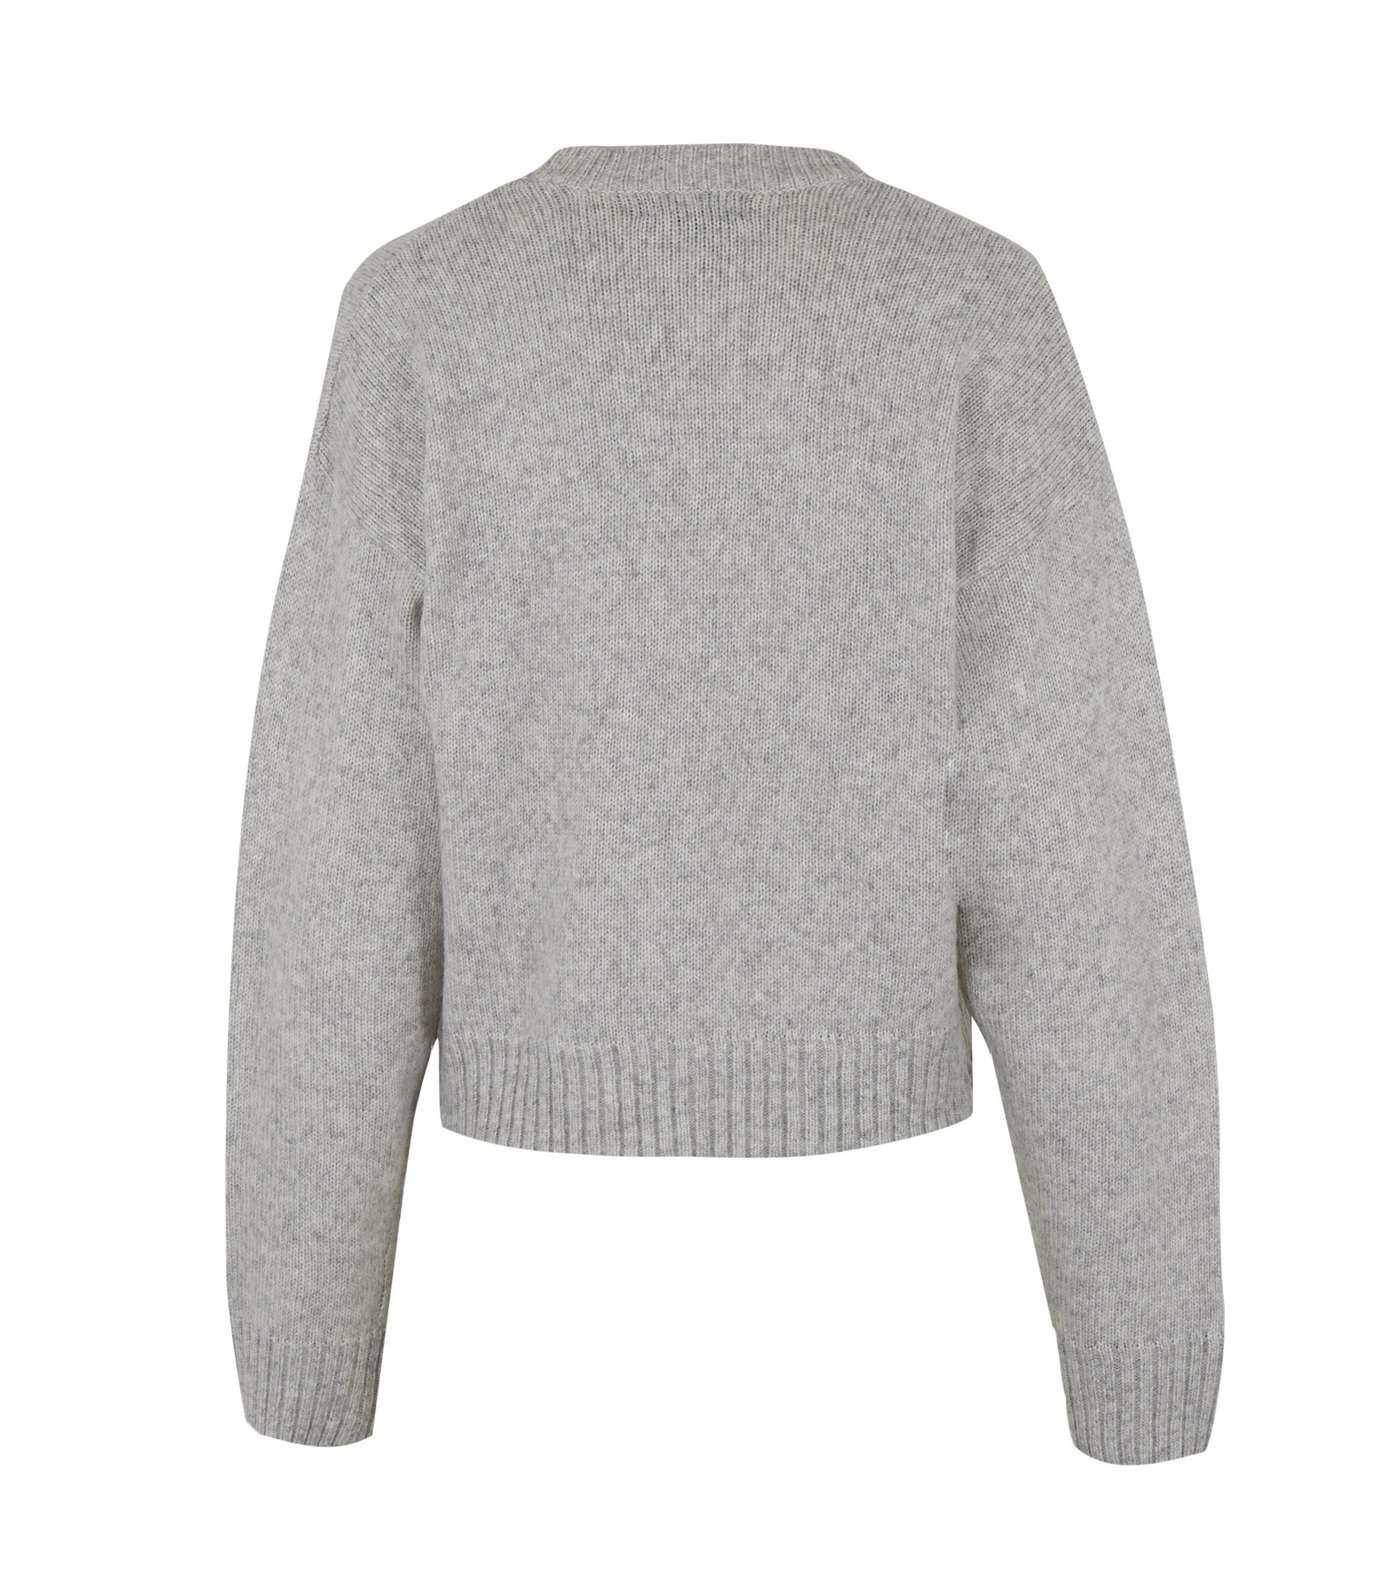 Tall Pale Grey Cropped Jumper Image 2